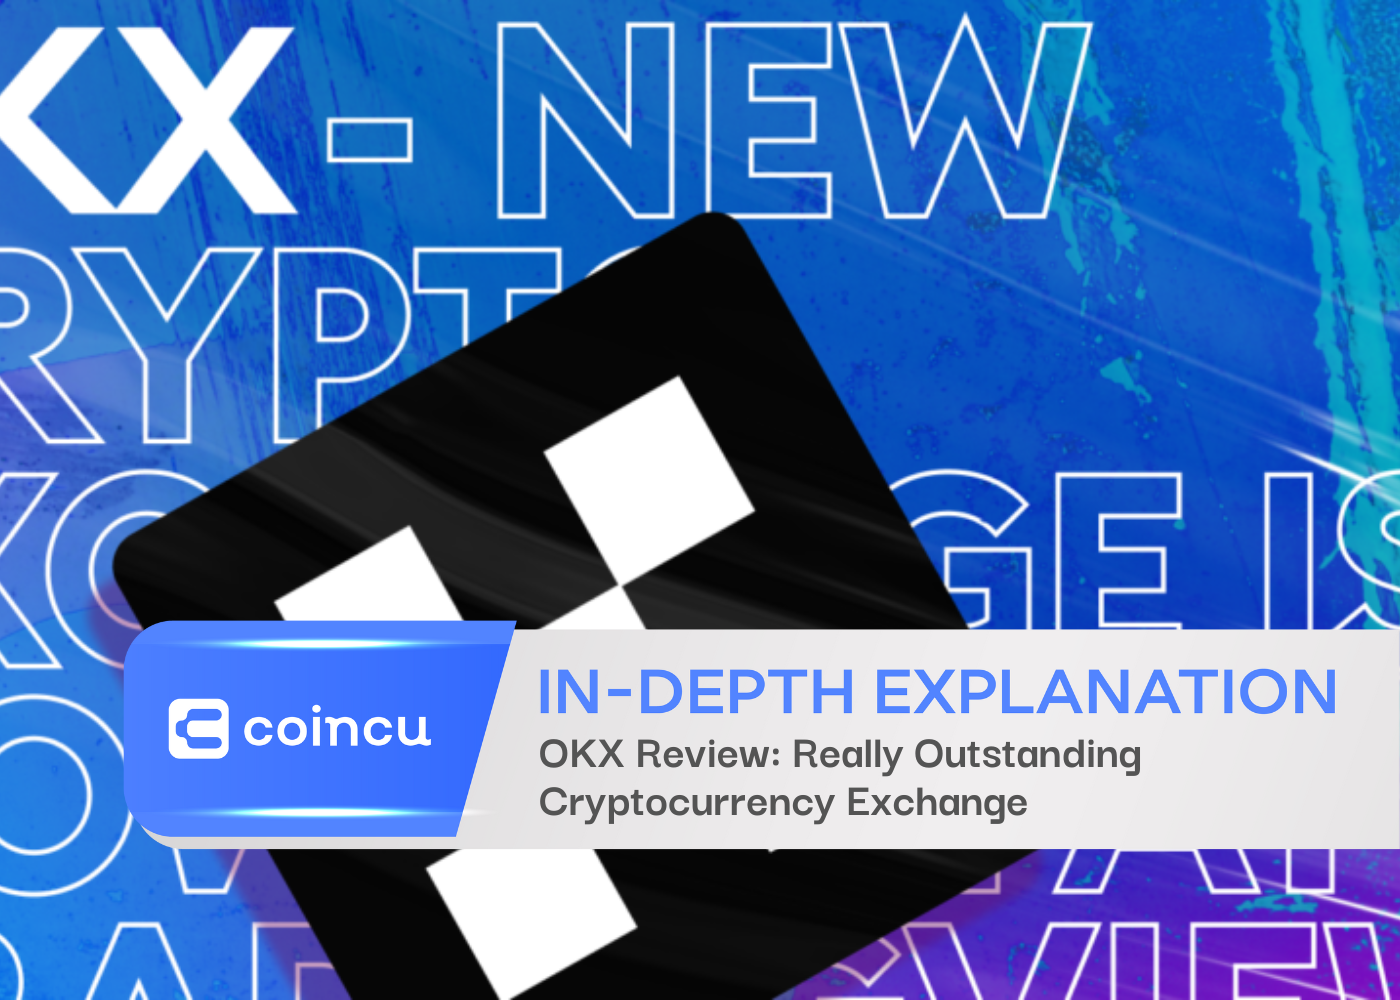 OKX Review: Really Outstanding Cryptocurrency Exchange